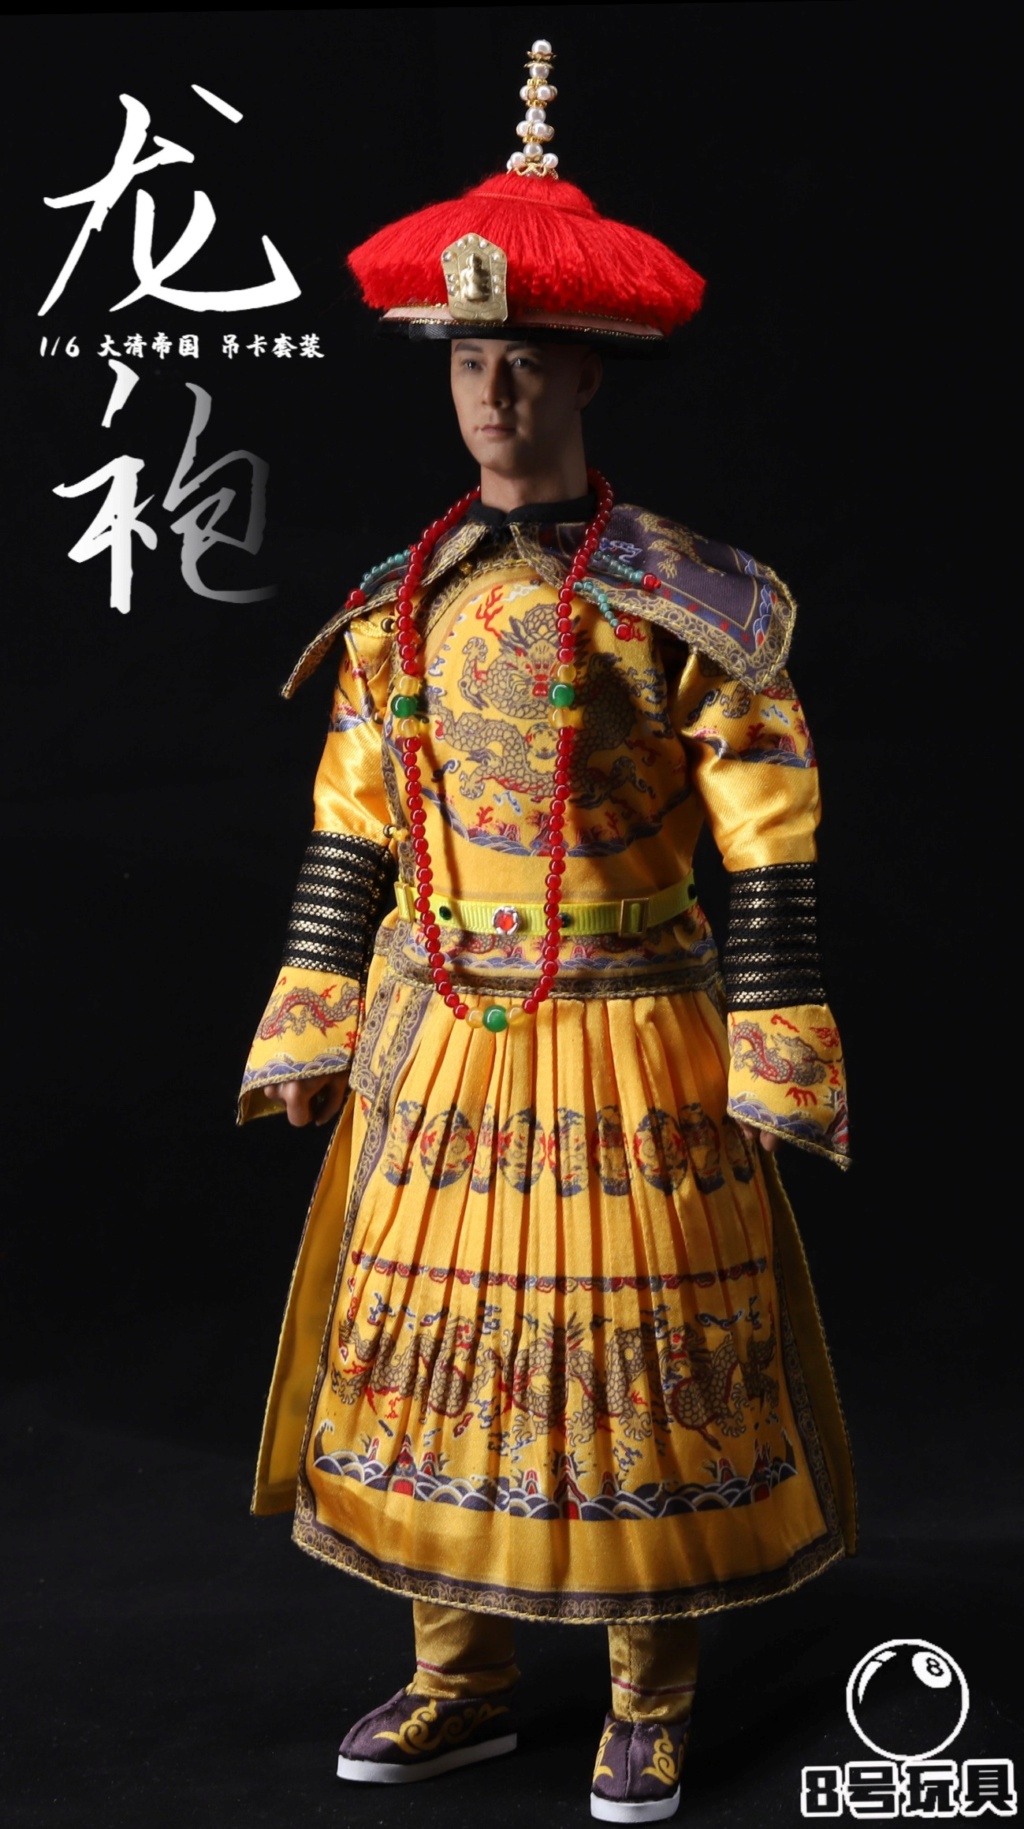 Clothing - NEW PRODUCT: New Model No. 8: 1/6 Emperor Qing Dynasty Dragon Robe Set  20301612